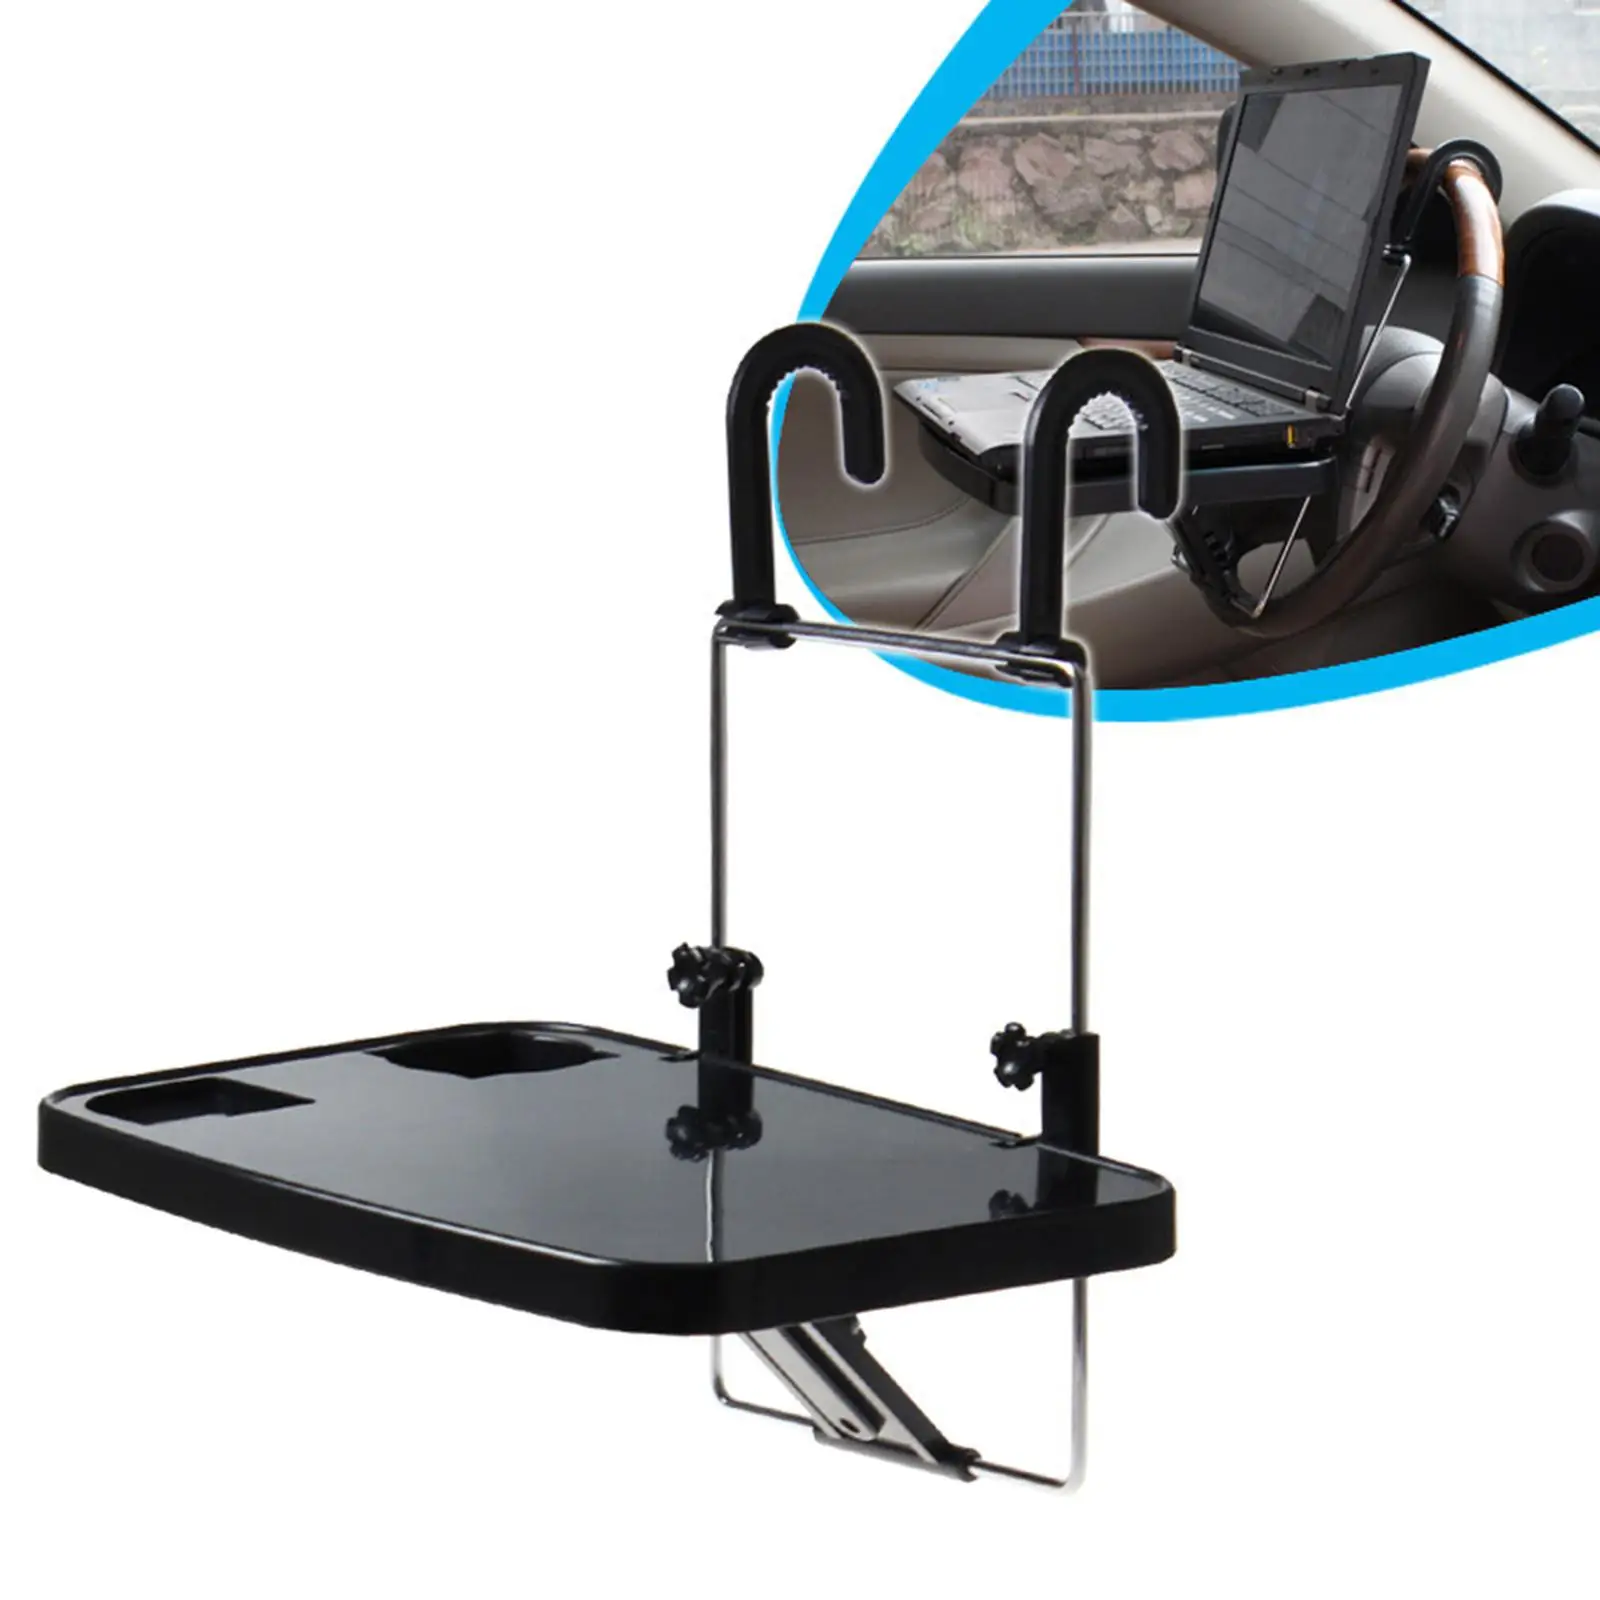 Car Computer Rack Portable Cup Holder Desk Table Table Holder Stand Fit for Notebook